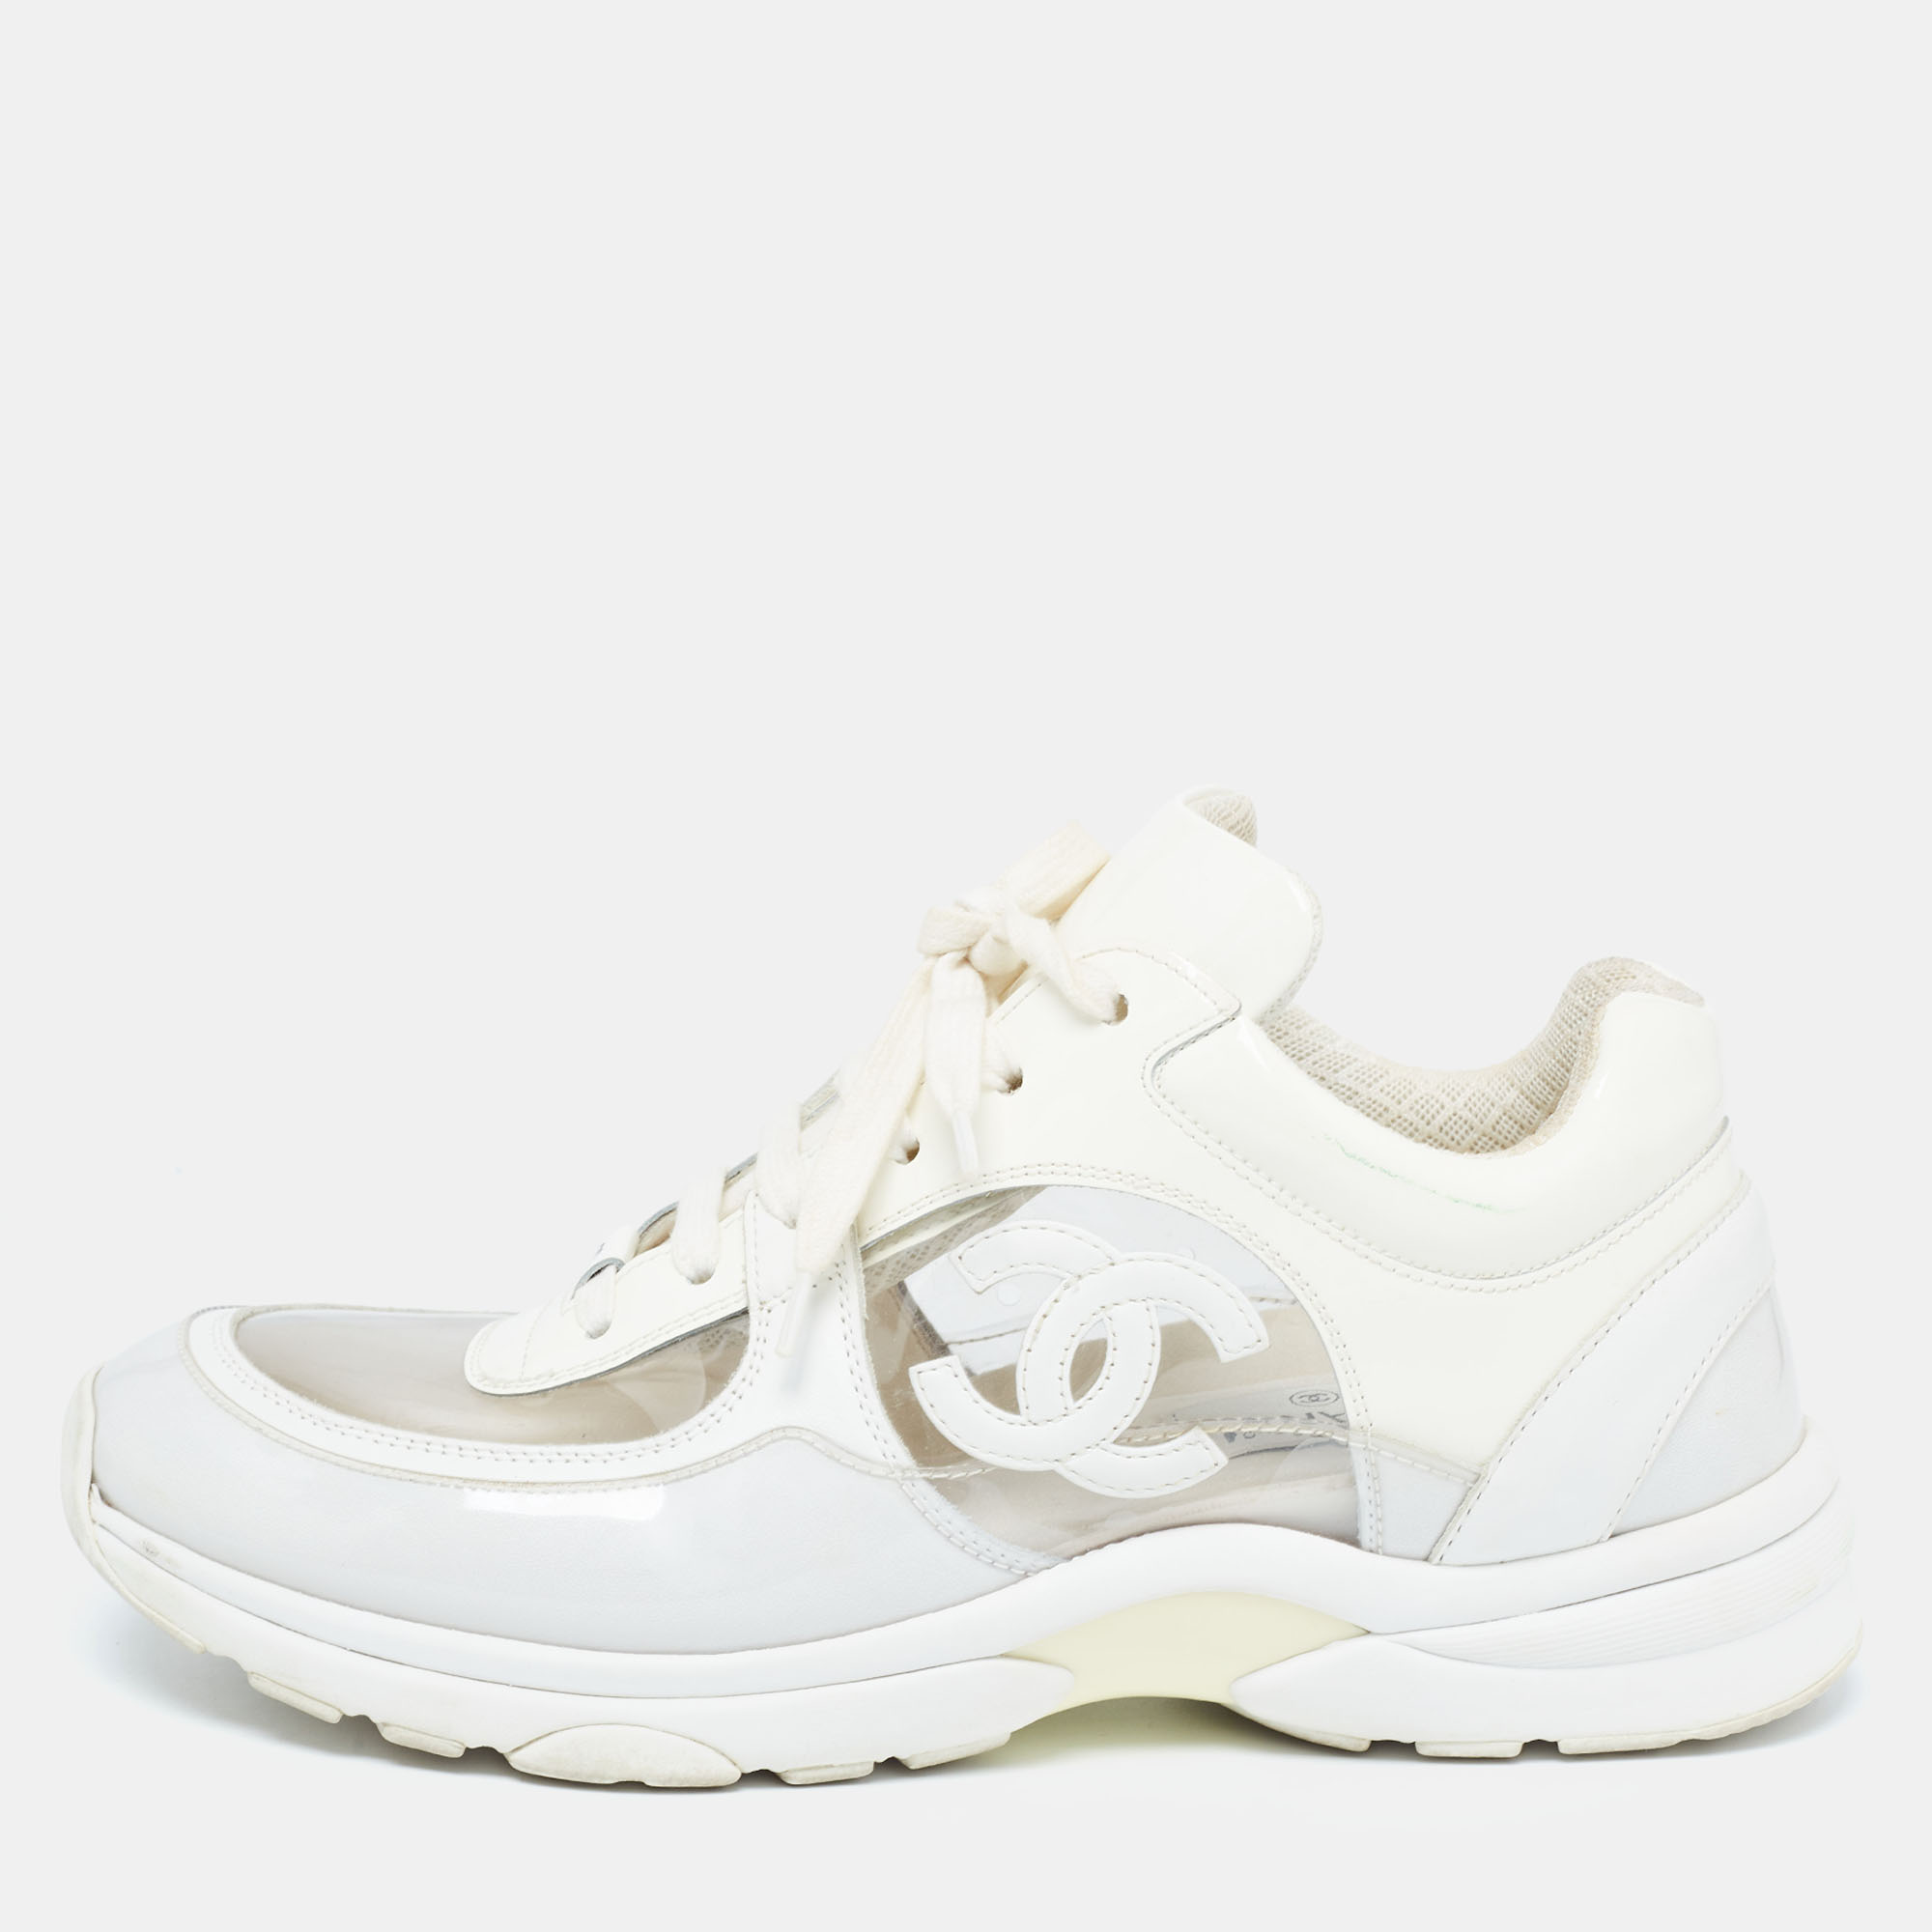 Stylish and High-Quality Chanel Sneakers